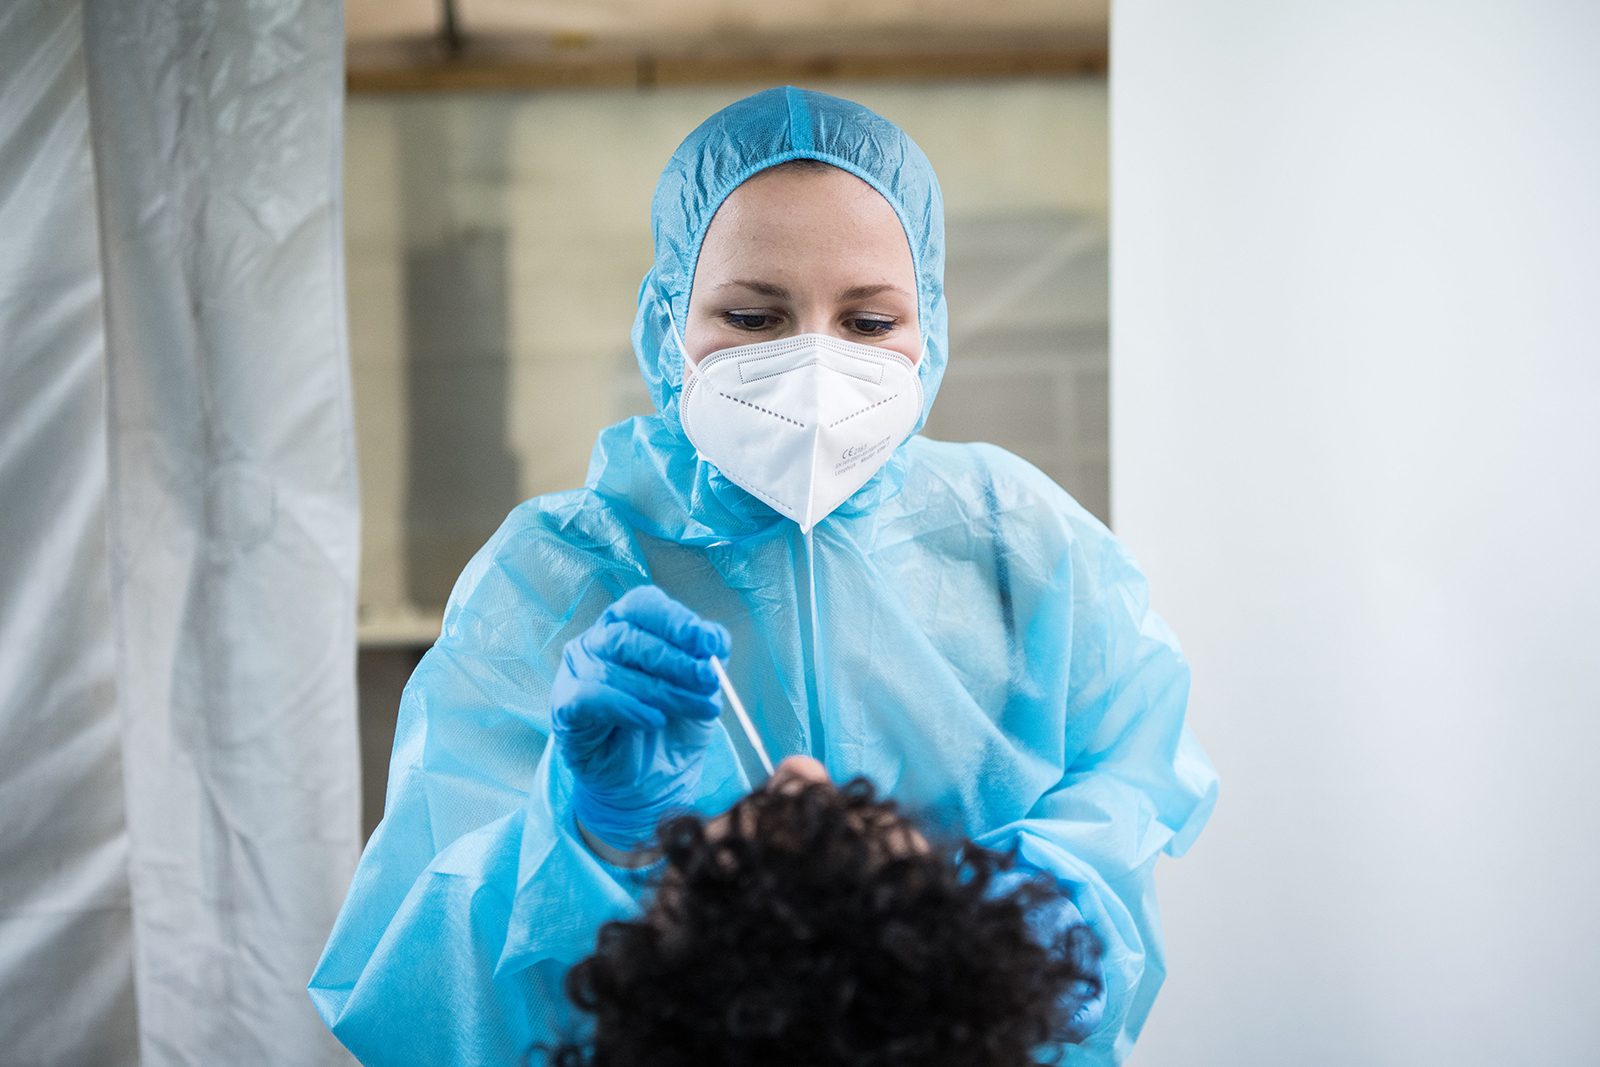 An employee wearing PPE takes a swab to test for Covid-19 on a patient at a coronavirus test center, in Berlin, on December 23.